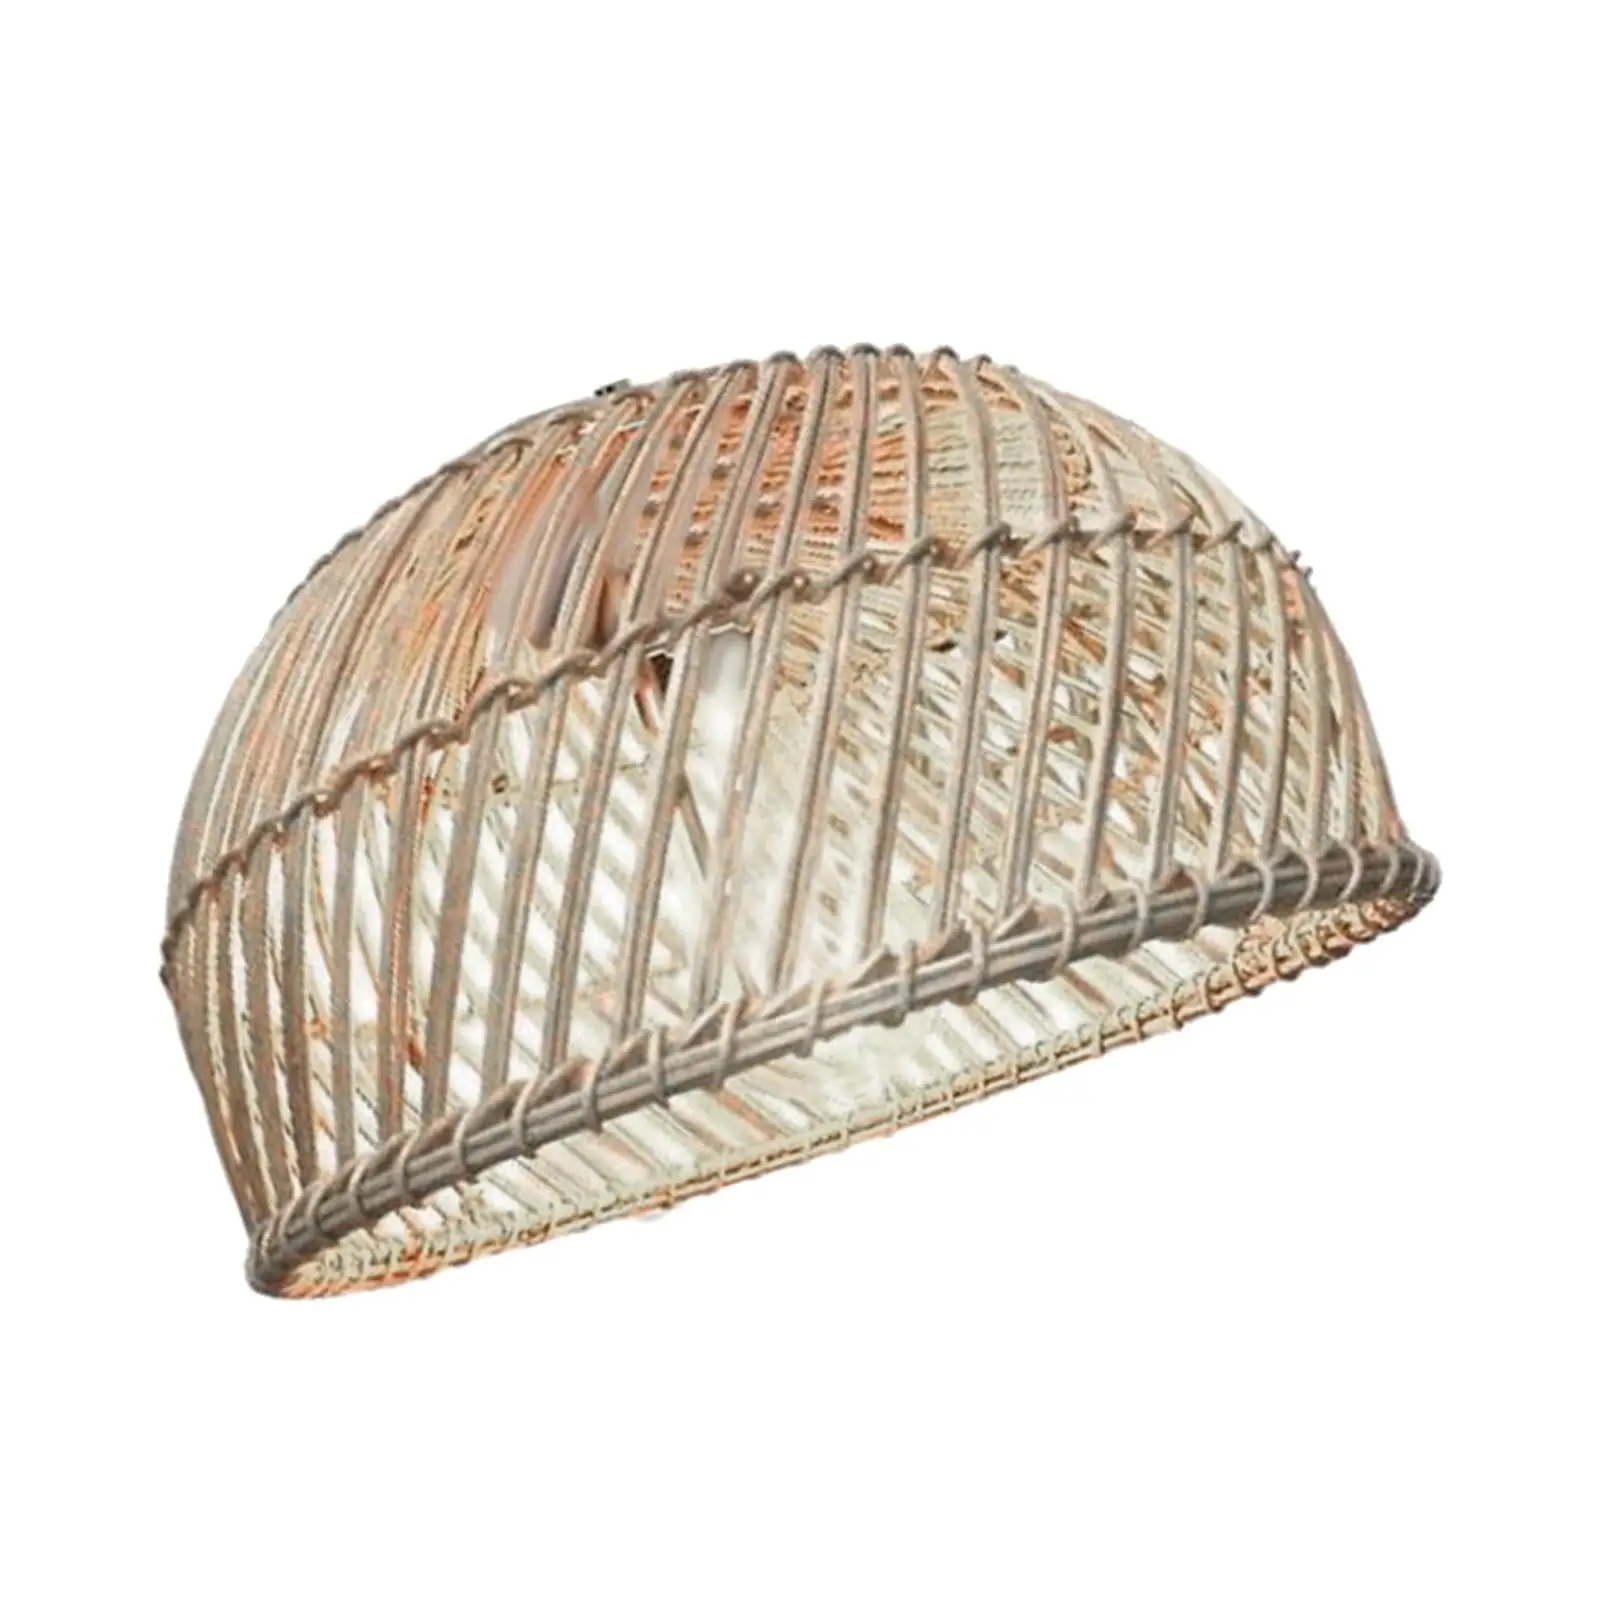 Retro Rattan Woven Lampshade Handmade Ceiling Pendant Light Shade Rustic Chandelier Cover for Bedroom Cafe Restaurant Teahouse